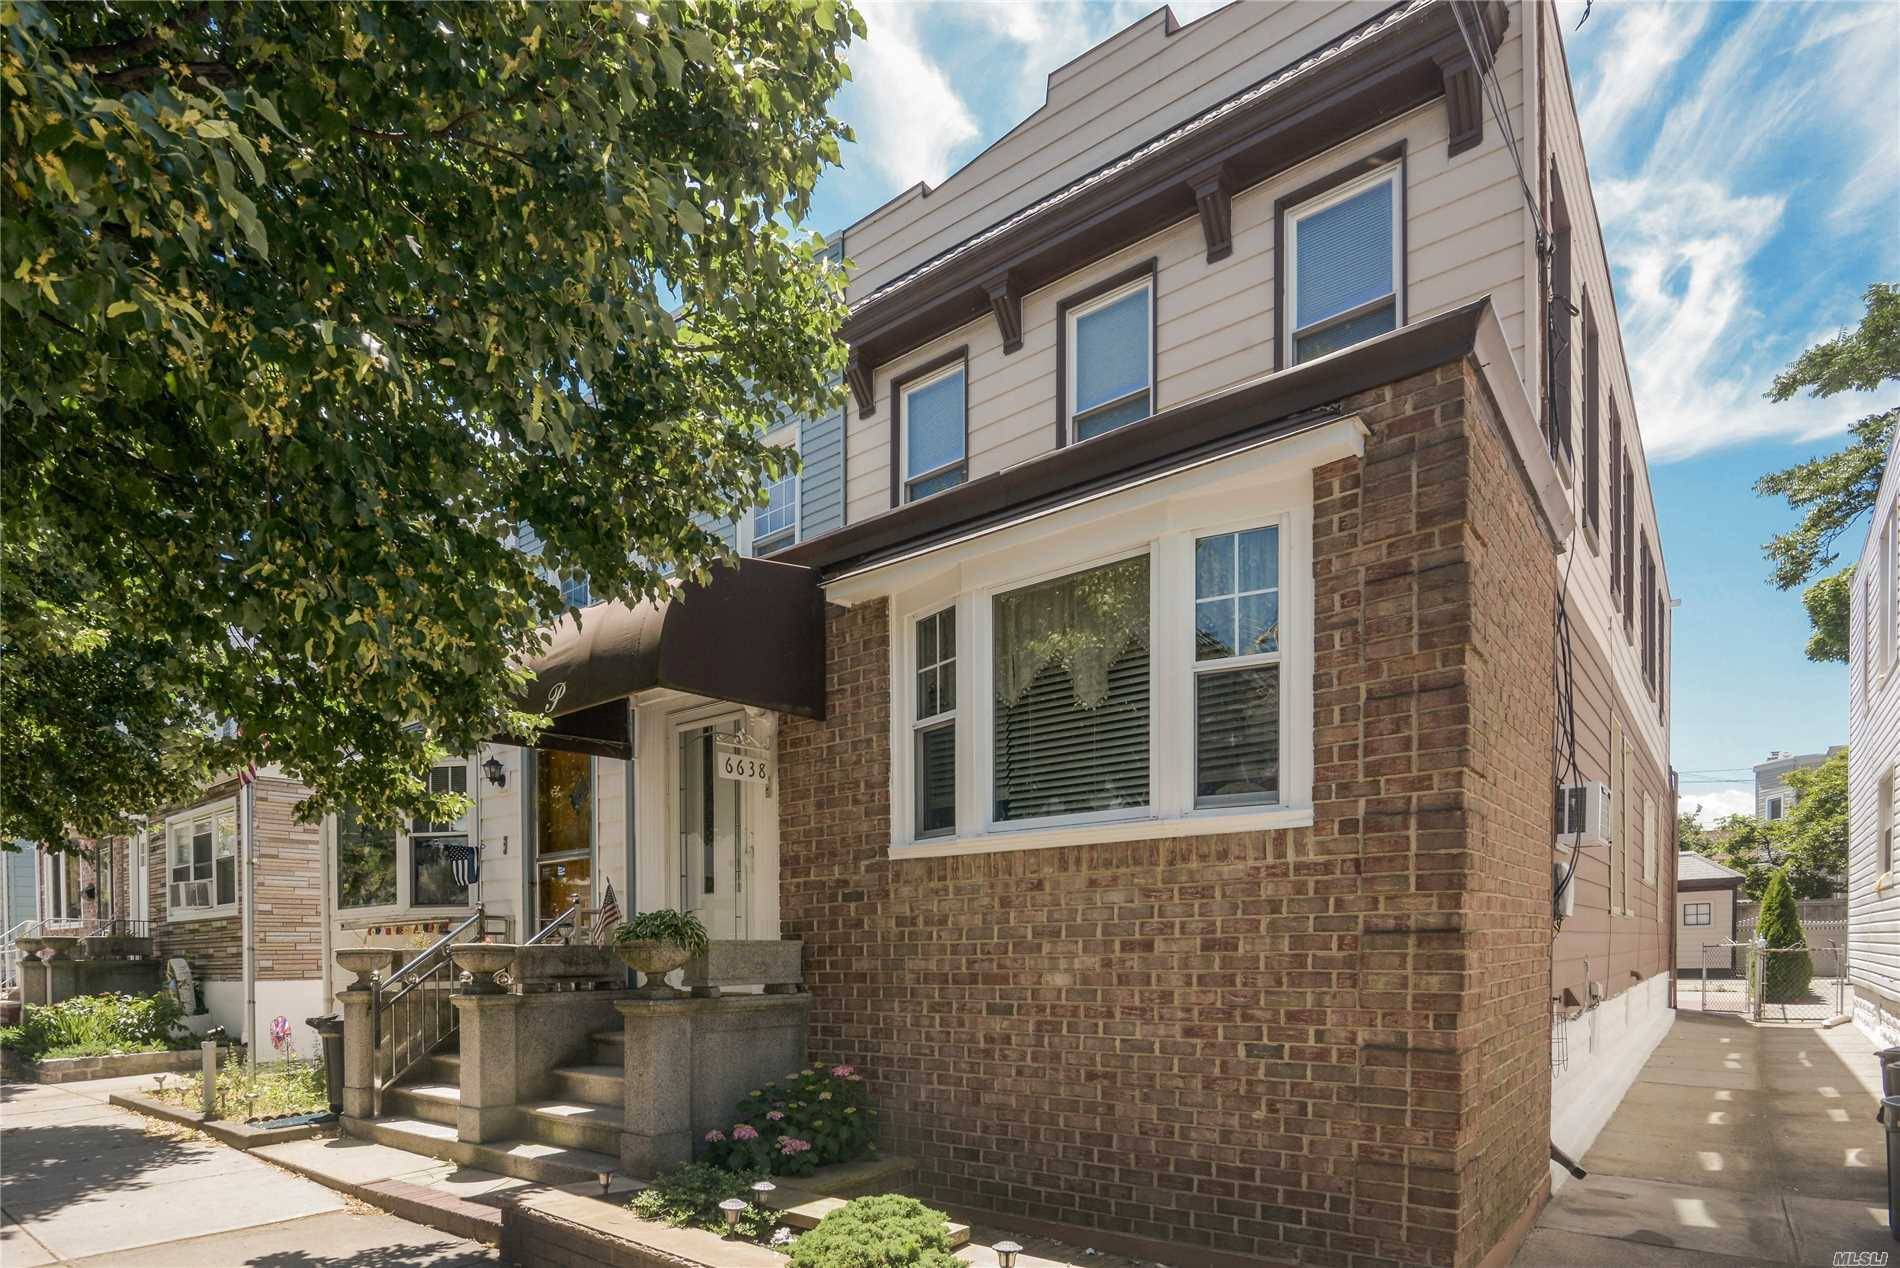 Great 2 Family Semi-Detch'd Home Located In The Heart Of Middle Village.